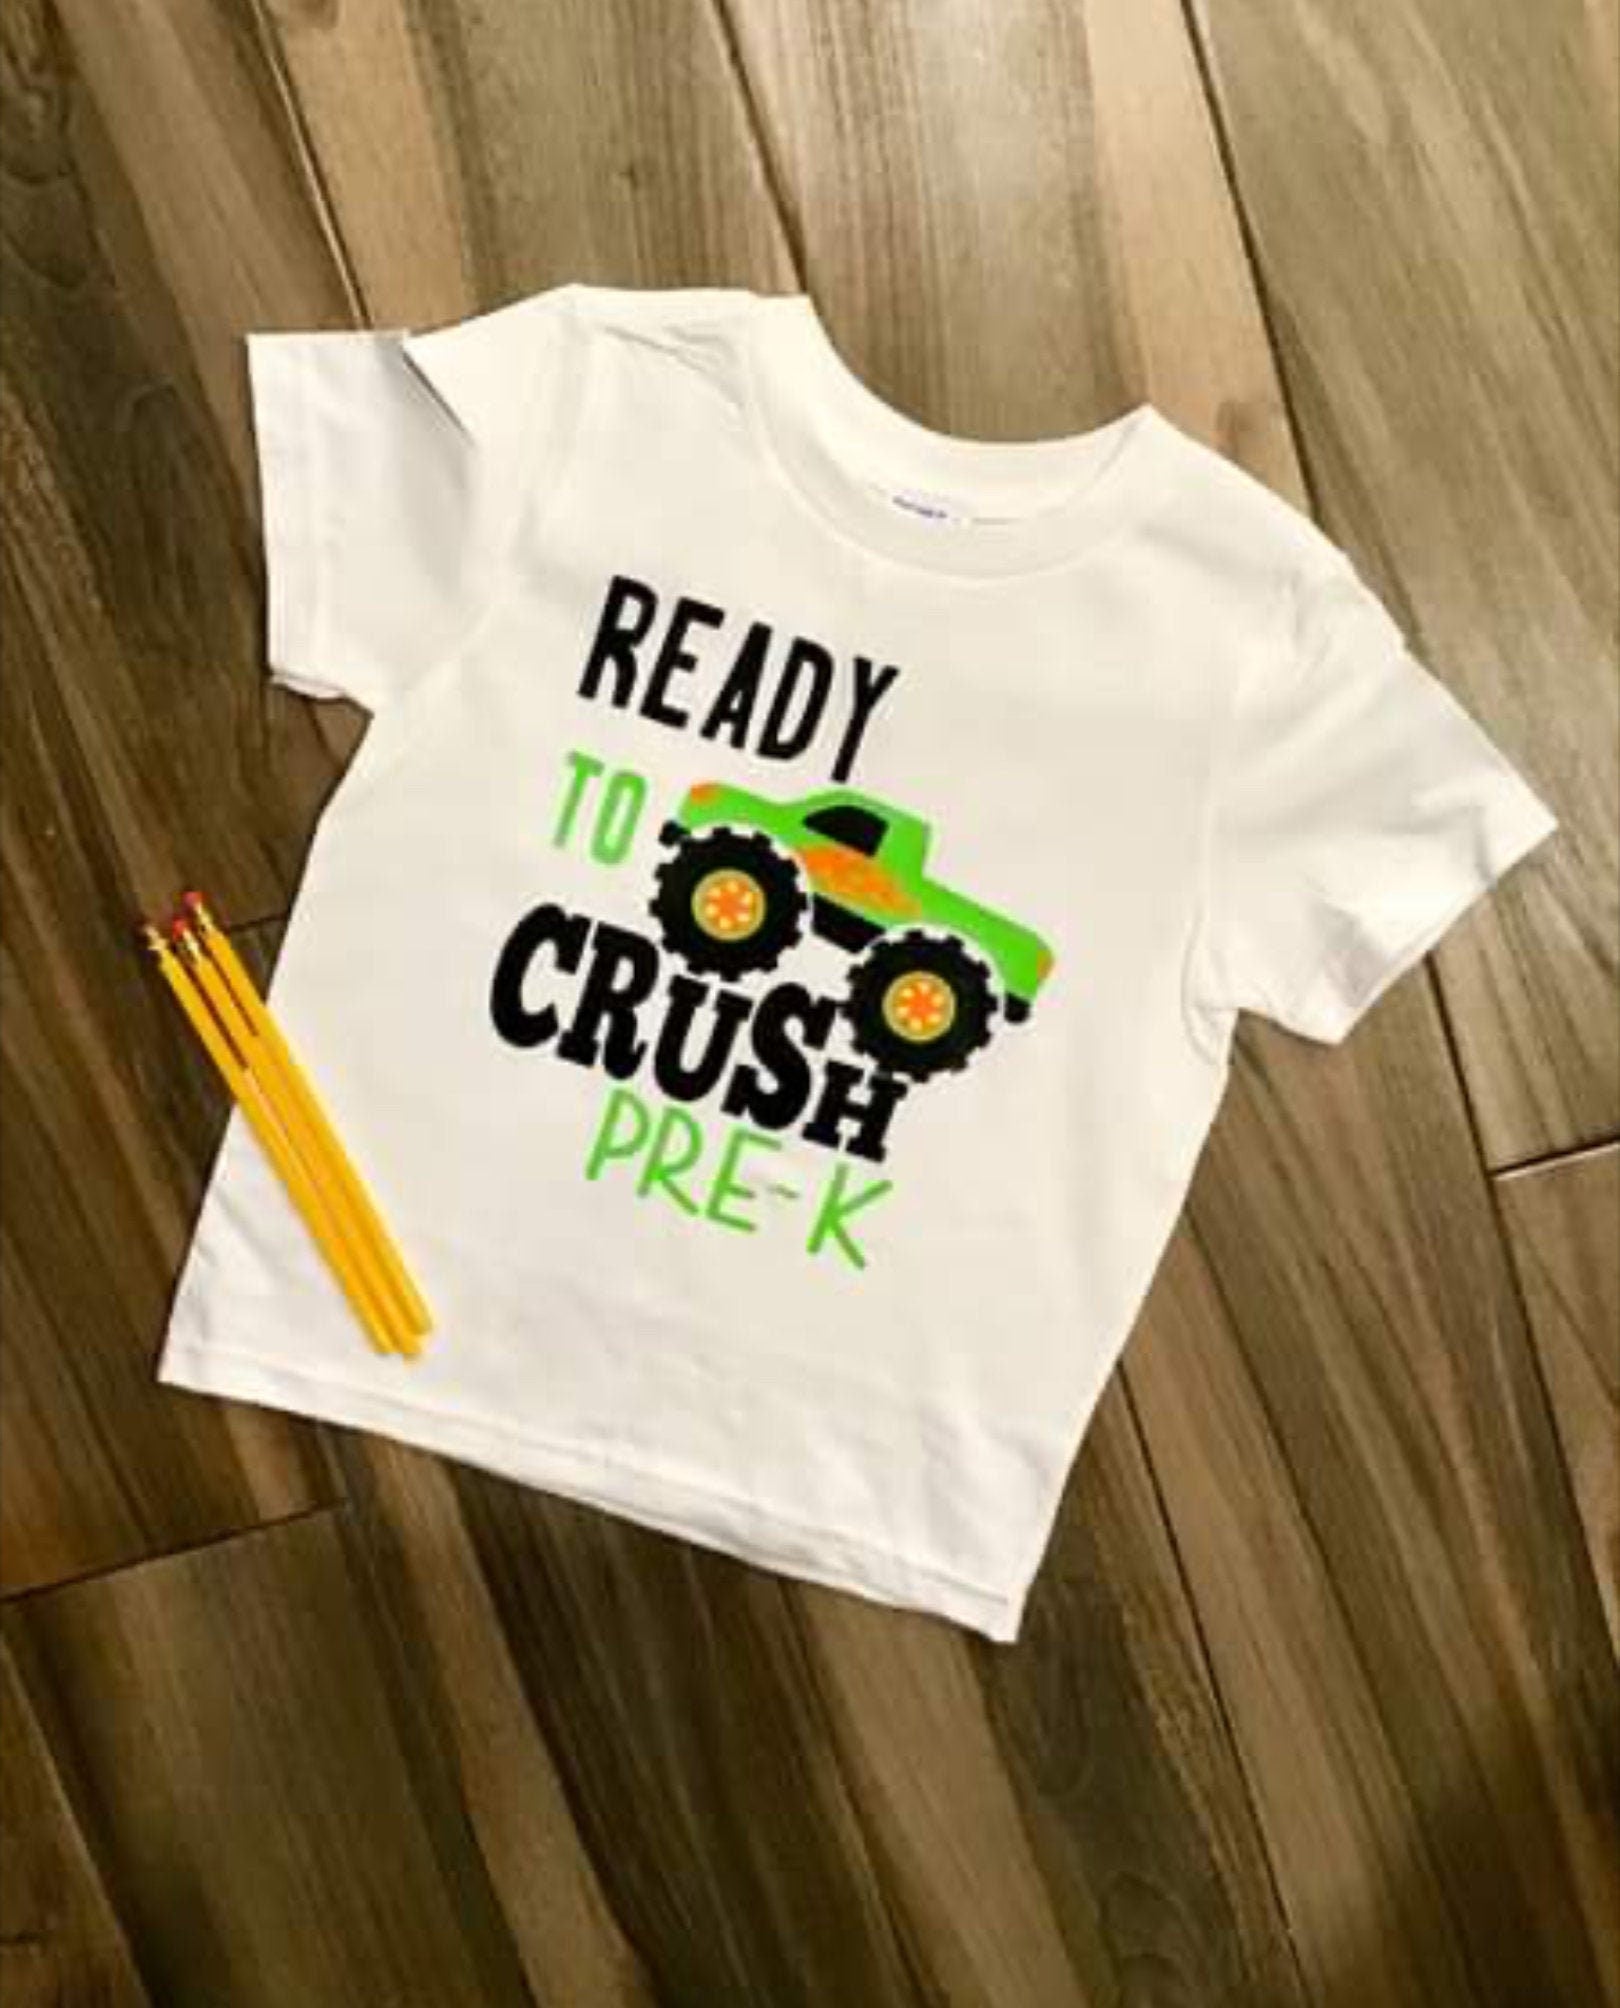 Customized Ready to Crush Pre-K/1st/2nd/3rd/4th/5th Grade Shirt